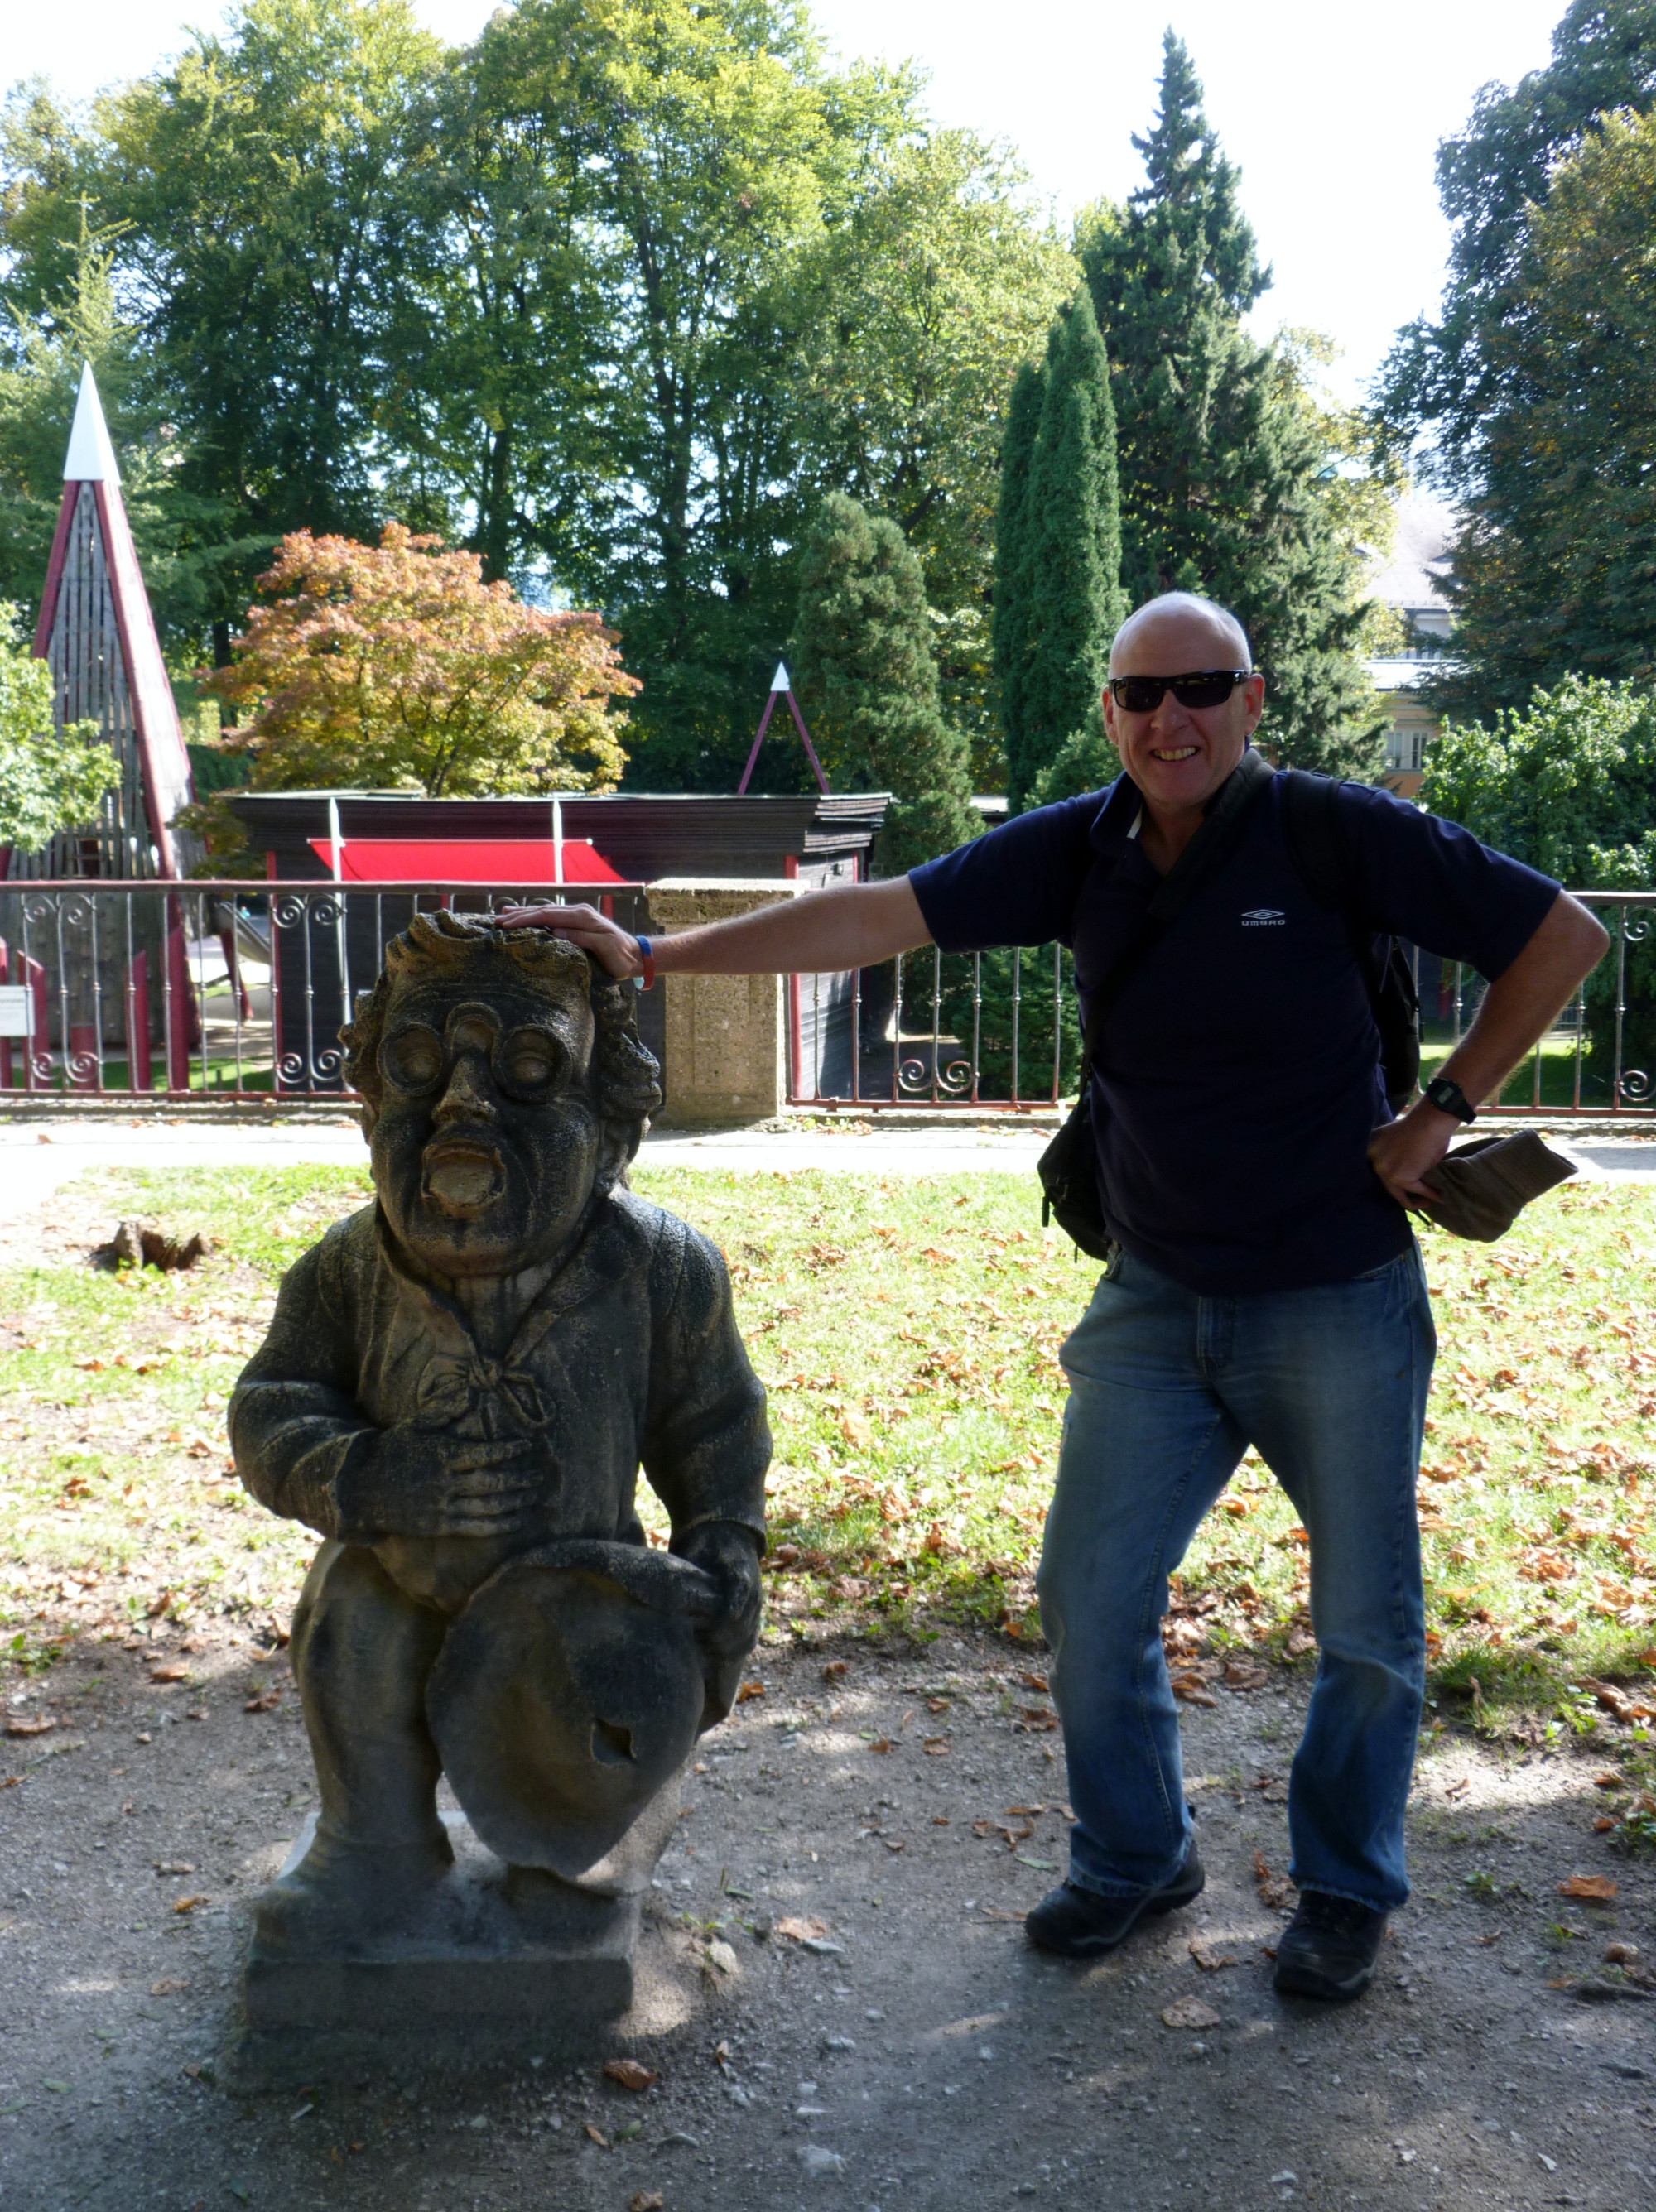 Moi with Dwarf Statue